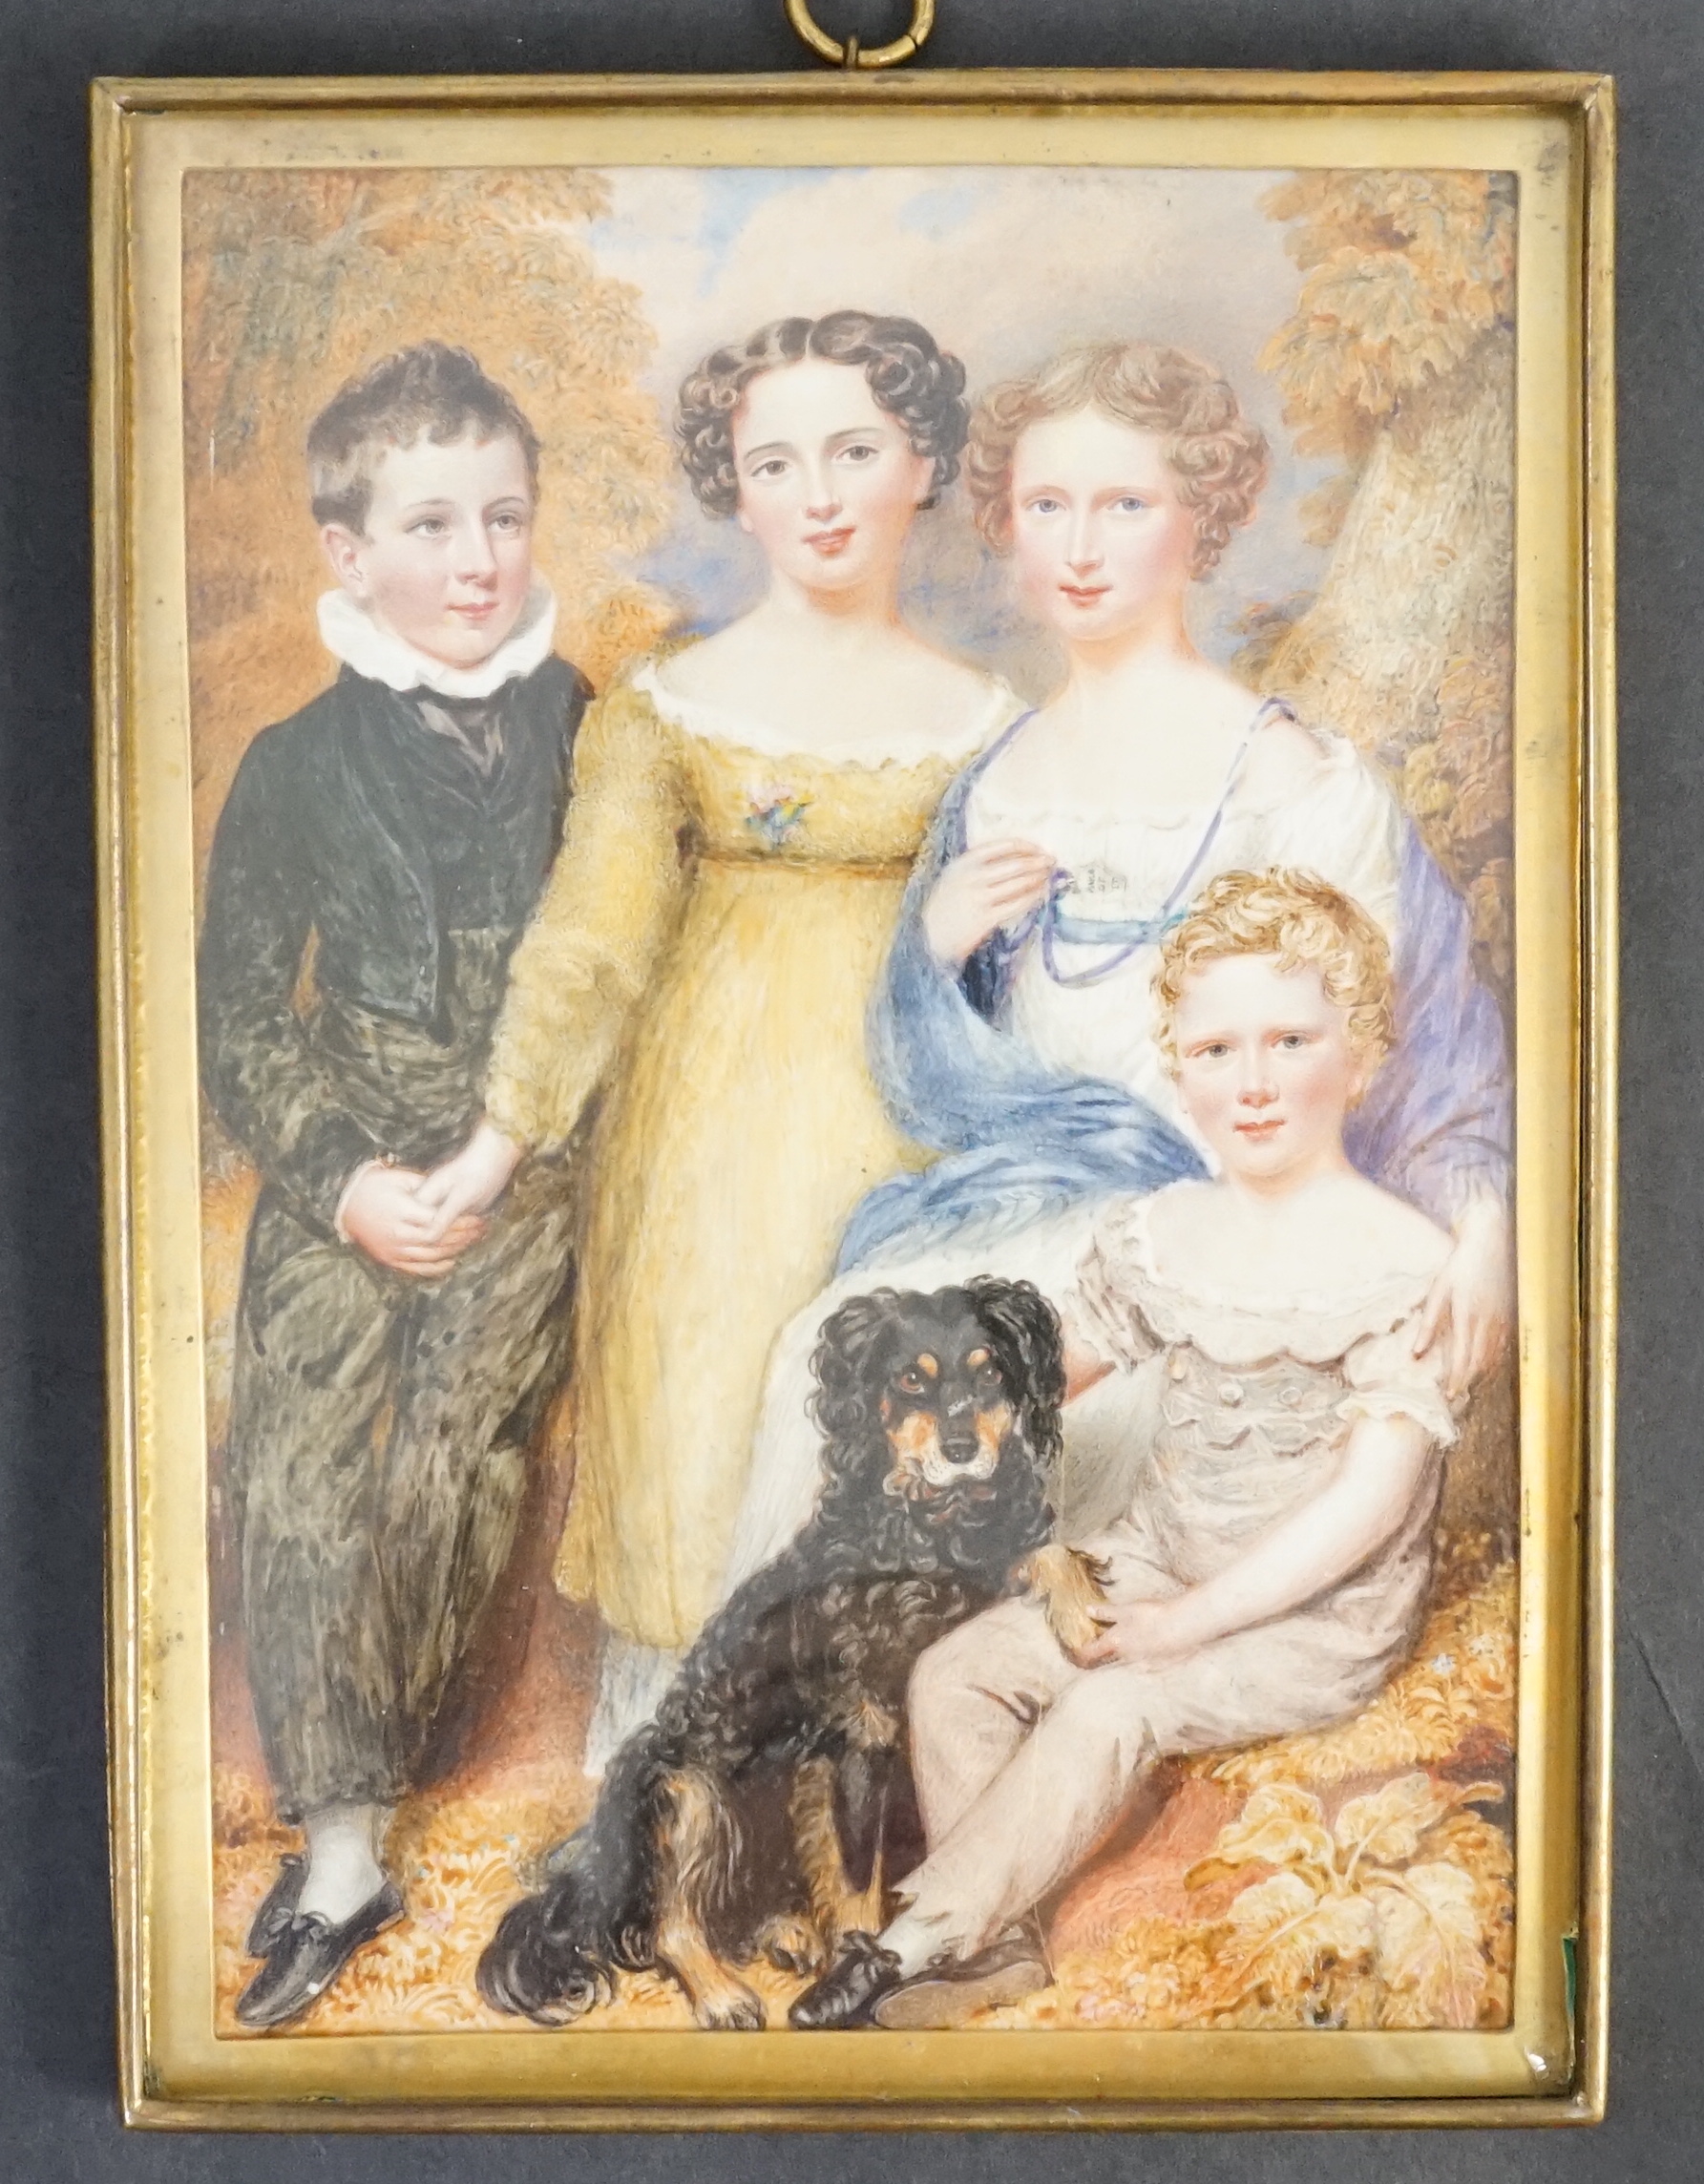 Walter Stephens Lethbridge (British, 1771-1831), Portrait miniature of a mother, her three children and a spaniel, watercolour on ivory, 18.5 x 13cm. CITES Submission reference ZVESWDPS